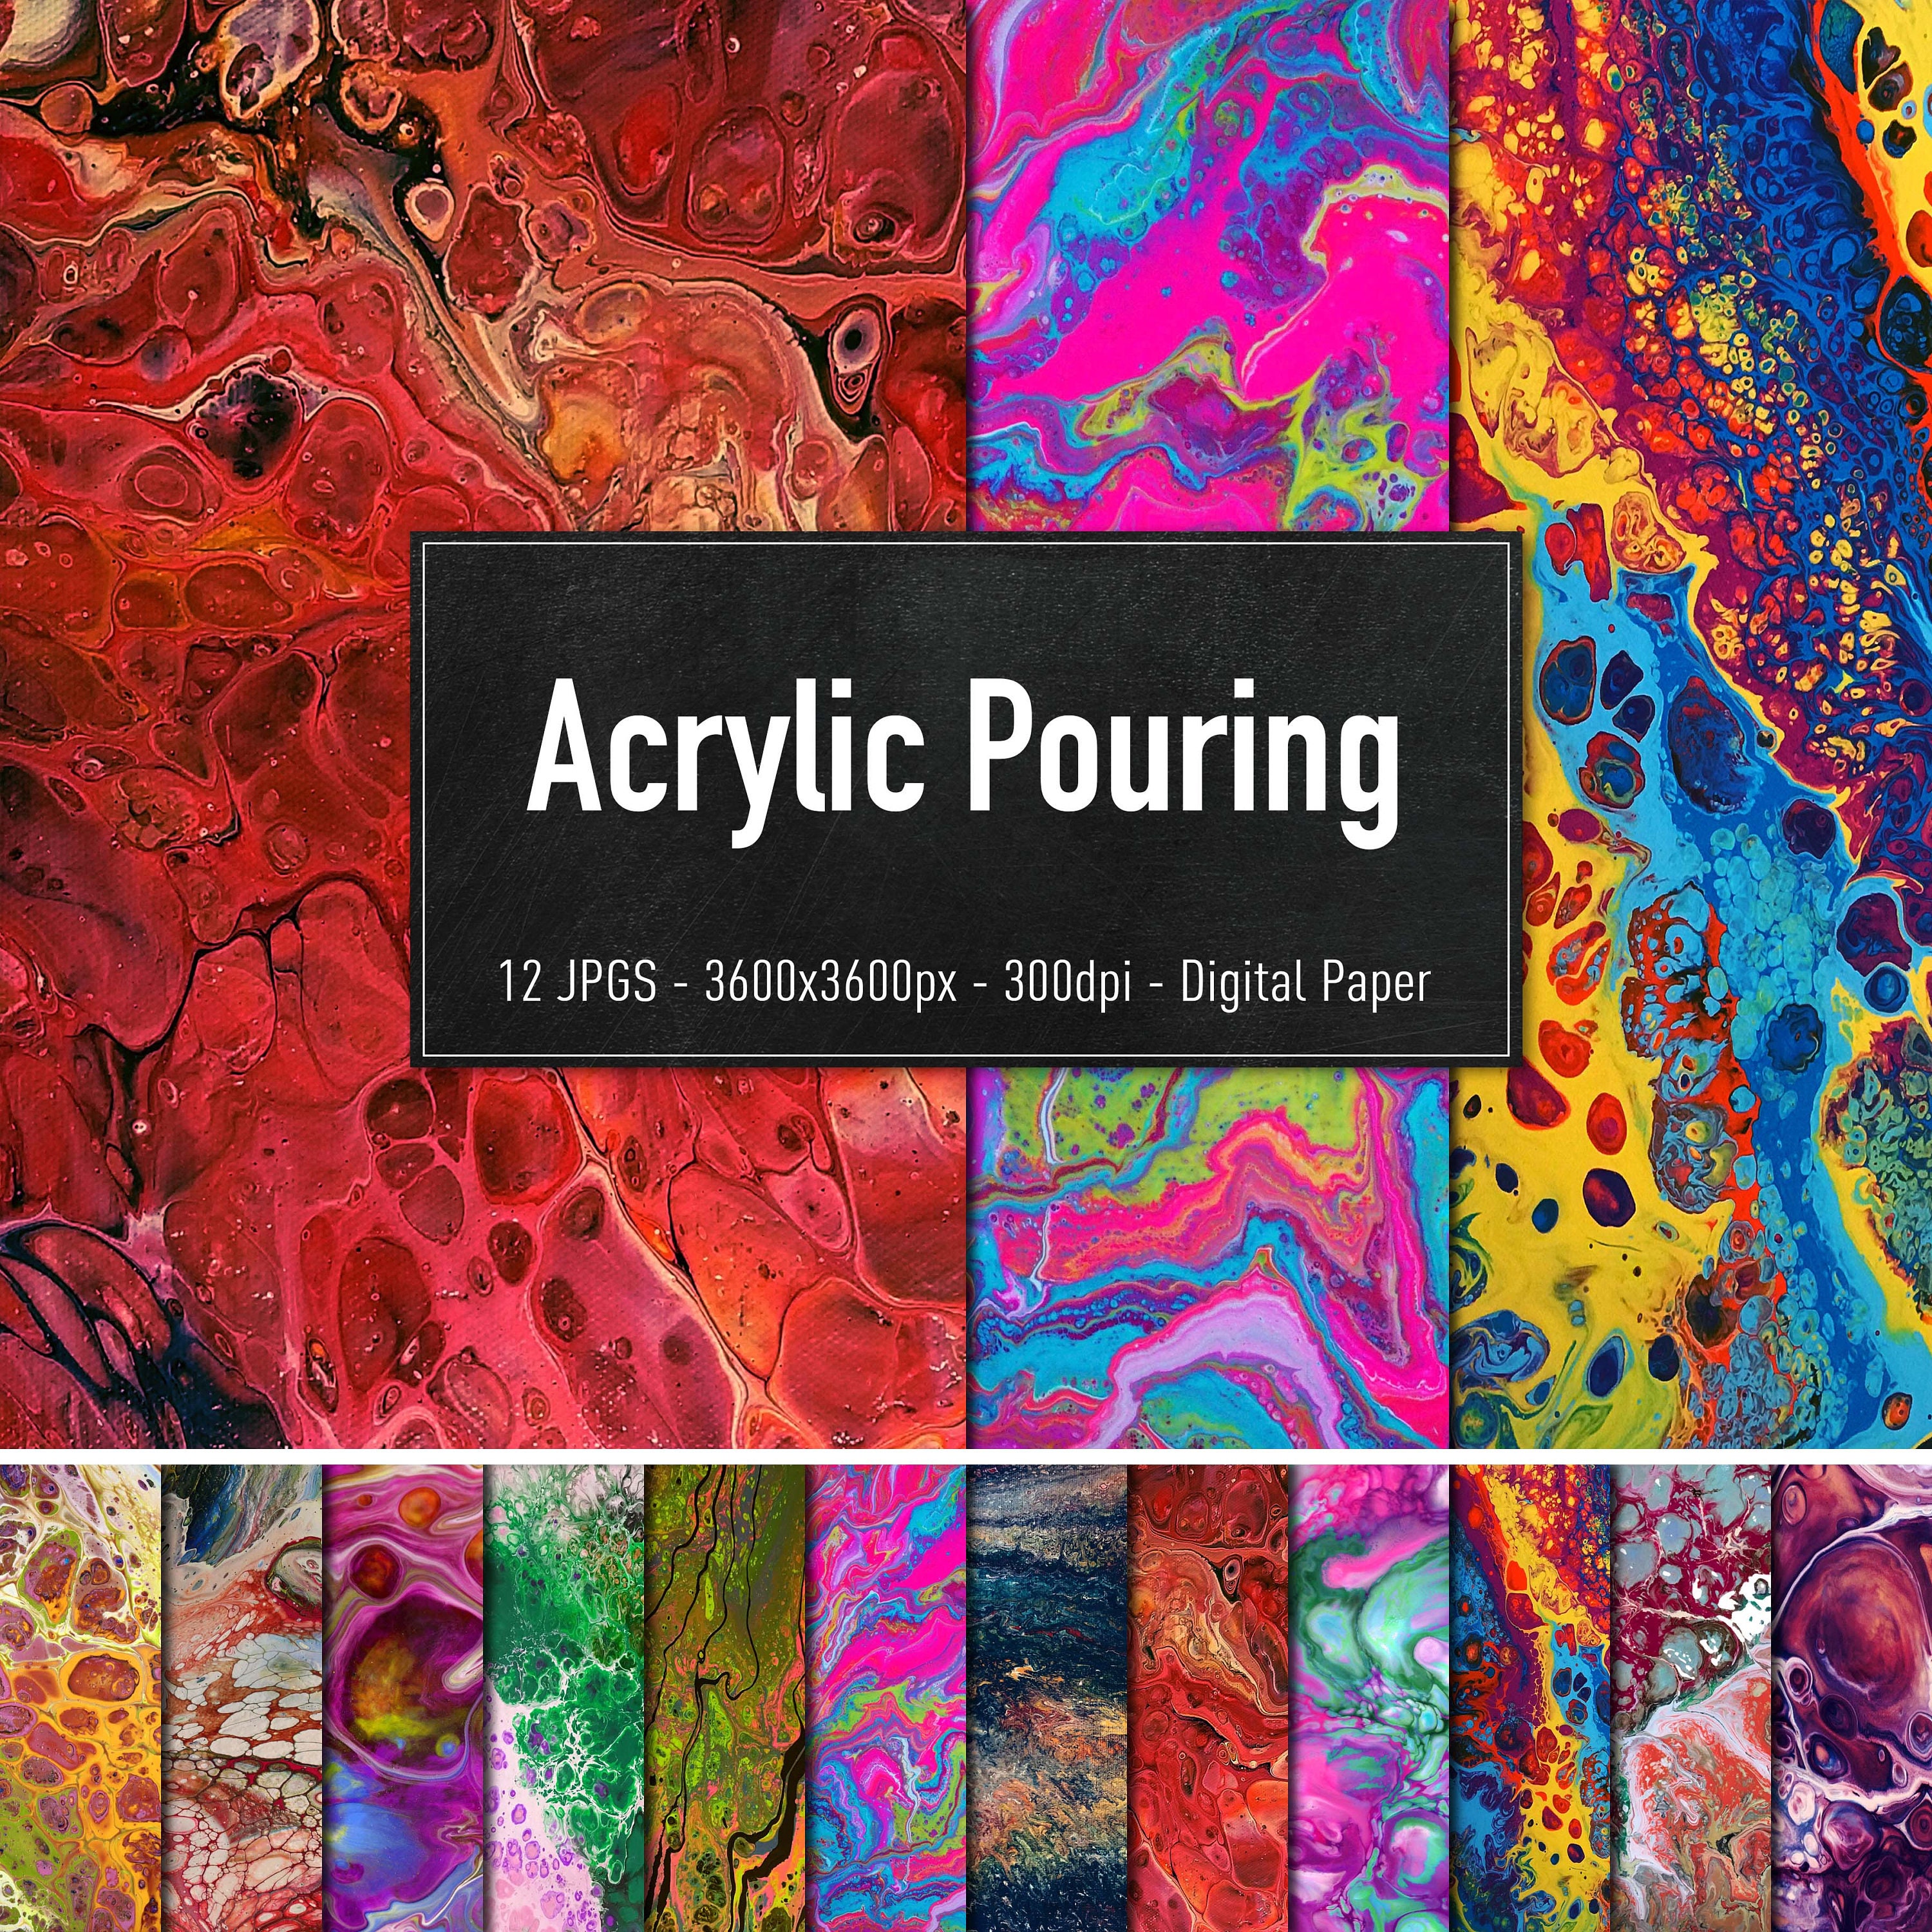 Easy Pourz Pre-mixed Acrylic Pouring Paint 100, 200 and 500 ml